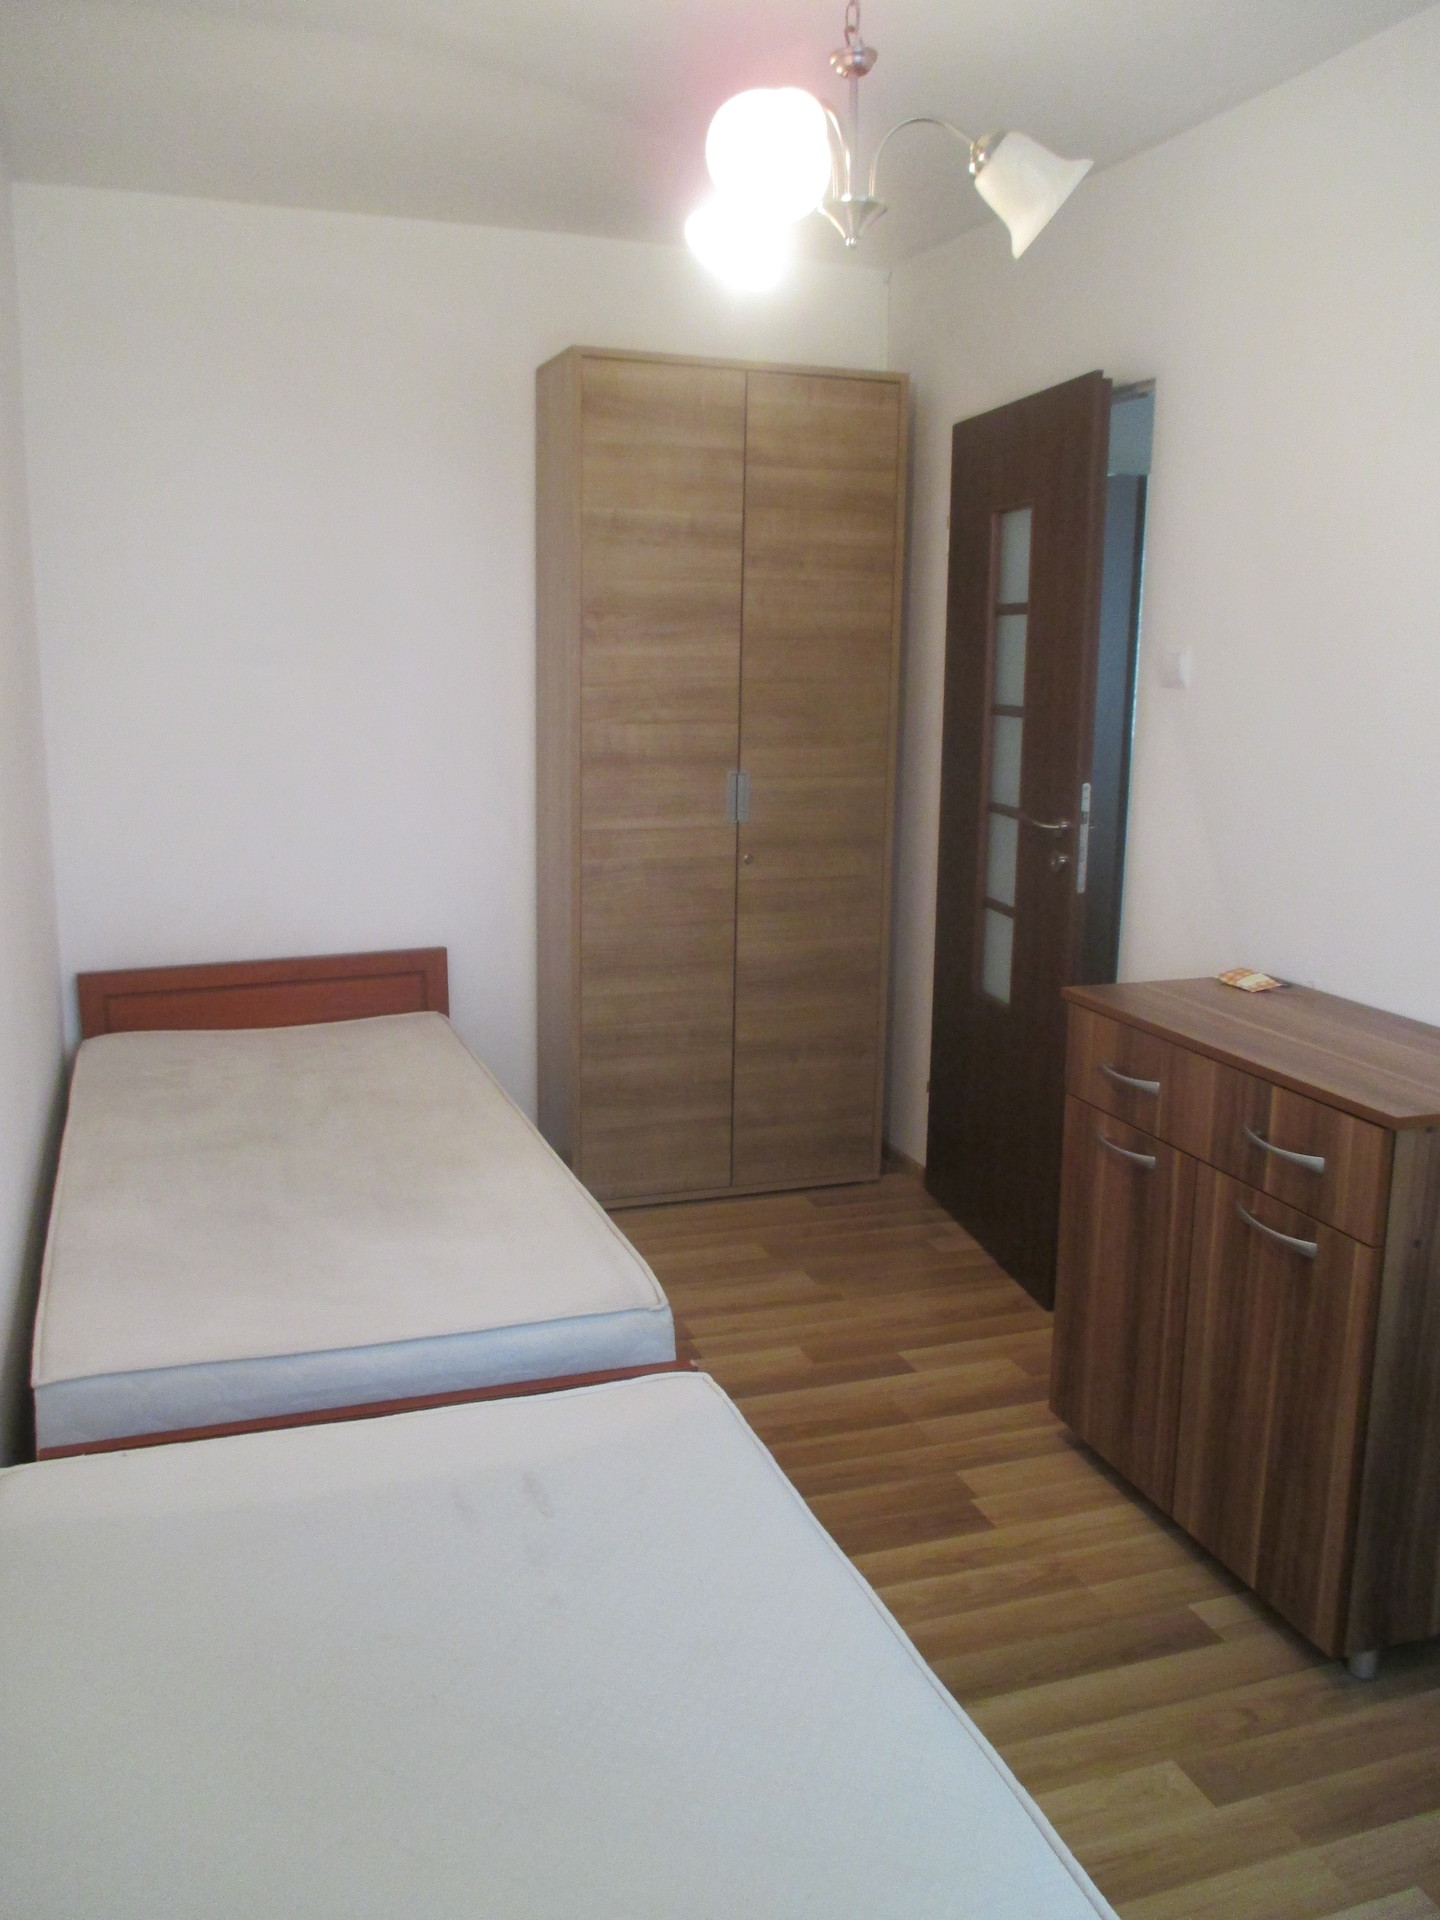 Flat Rooms To Rent For World Youth Day Cracow Krowodrza